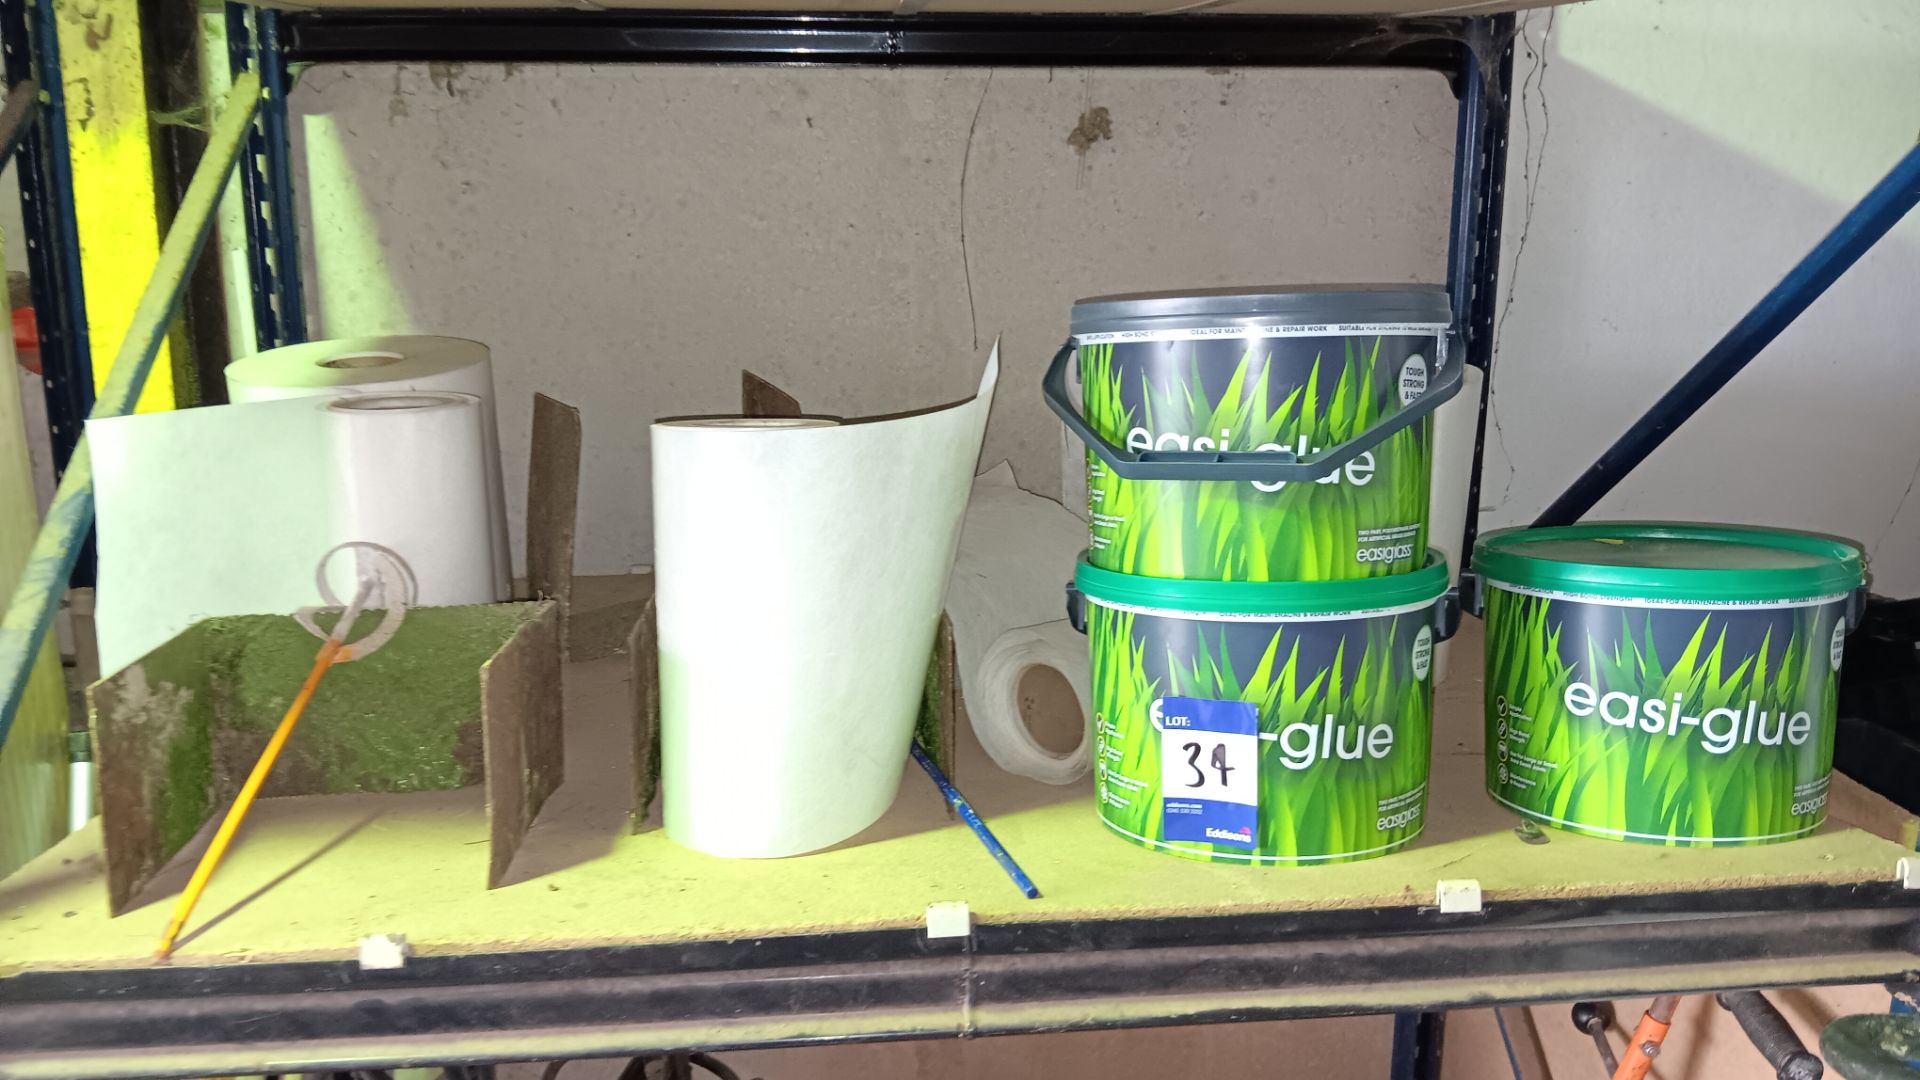 Contents of shelf to include 3 x 5.5kg tubs of Easigrass artificial lawn glue, part rolls of lawn